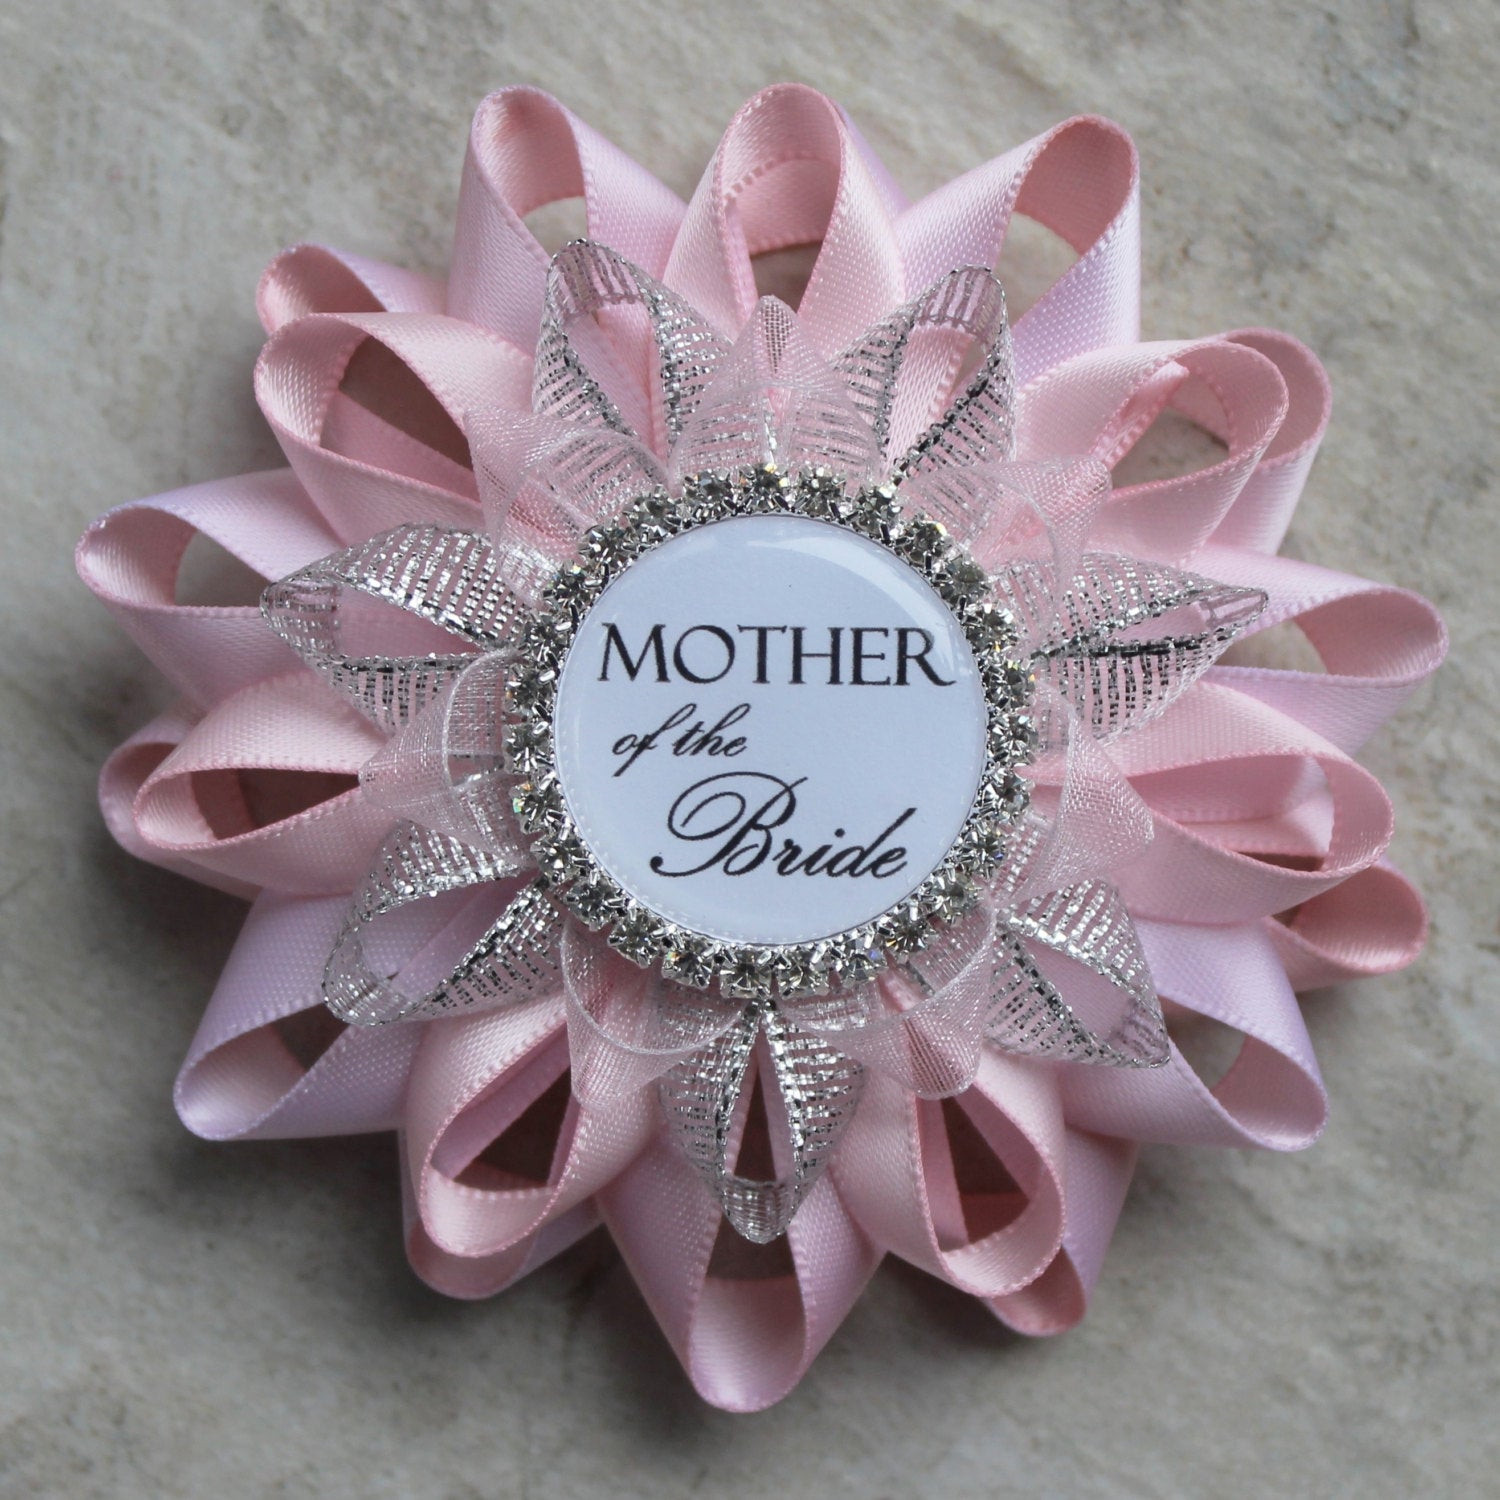 Bridal Shower Gift Ideas From Mother Of The Bride
 Pink Bridal Shower Decorations Mother of the Bride Gift